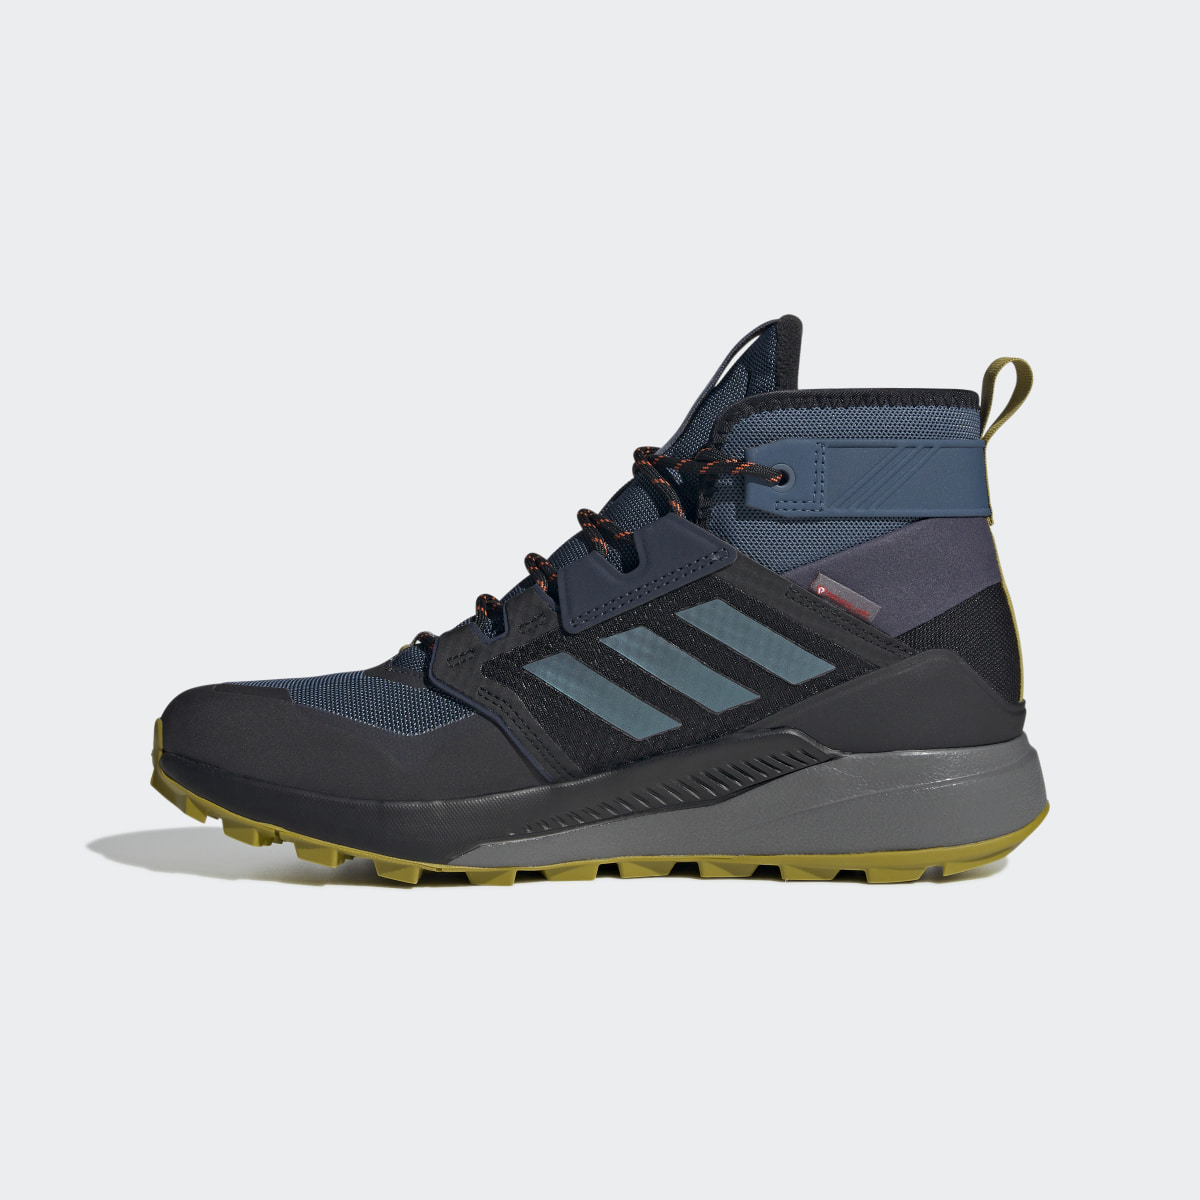 Adidas Terrex Trailmaker Mid COLD.RDY Hiking Boots. 7